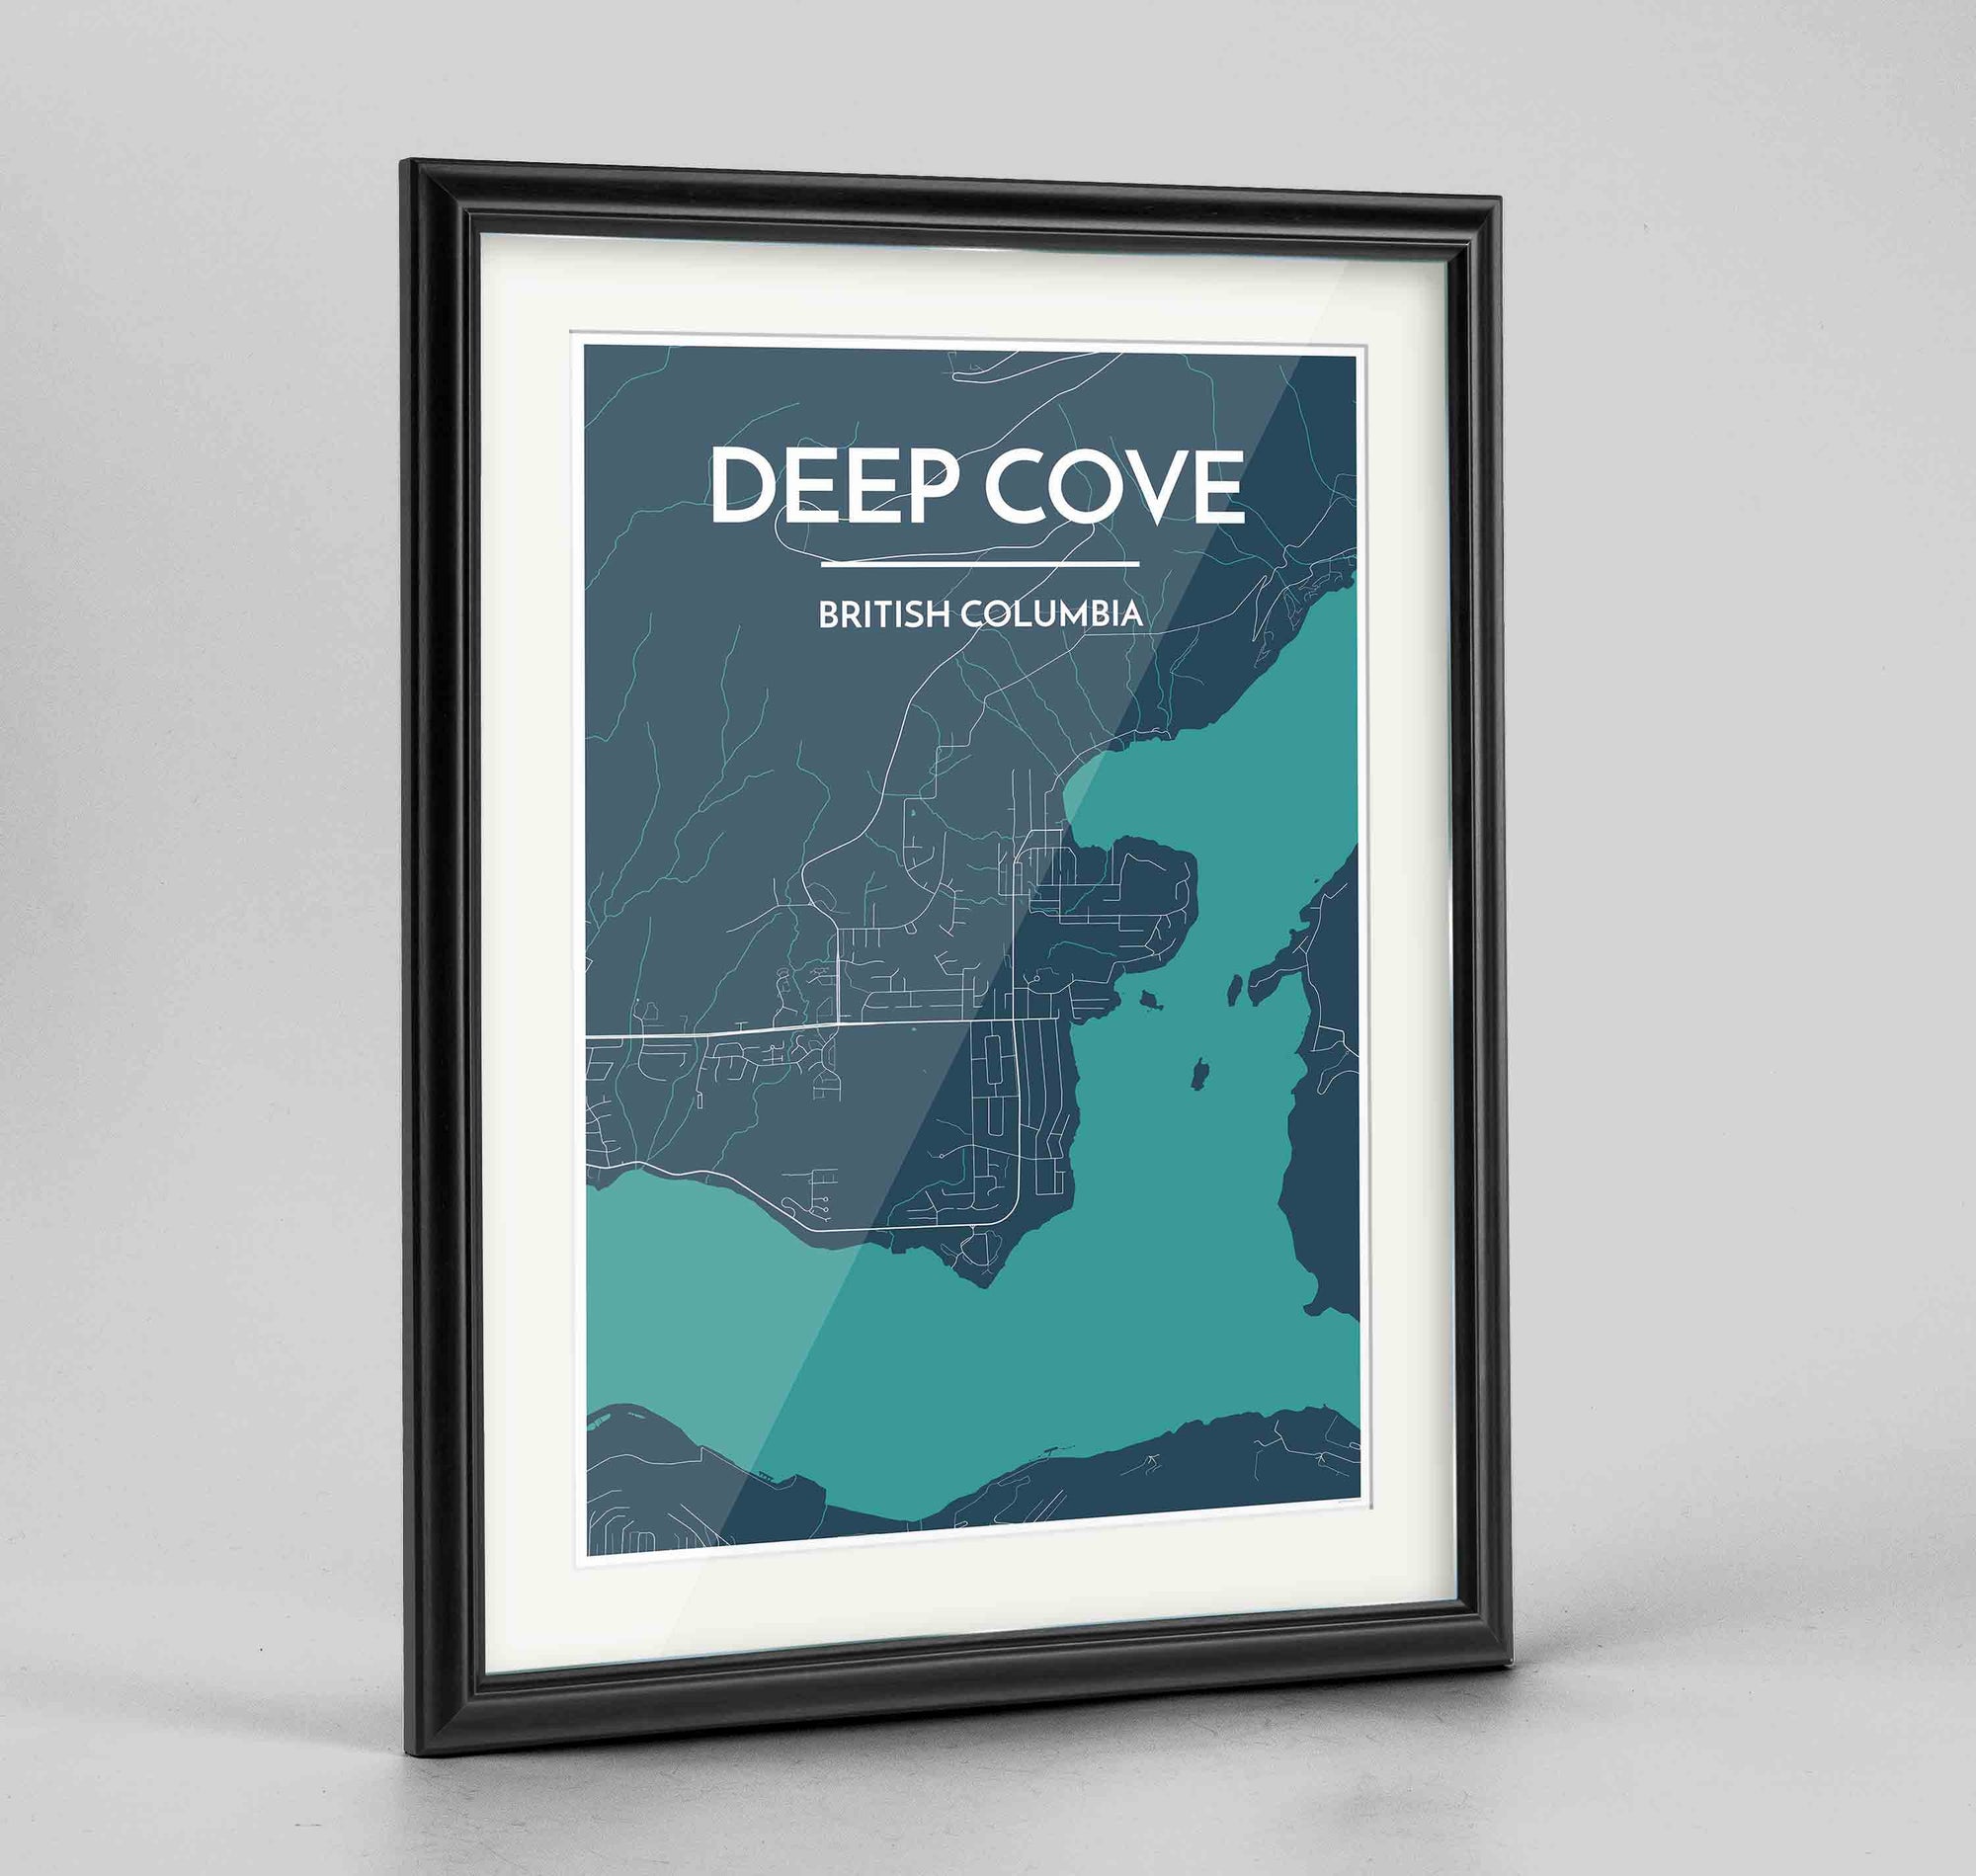 Framed Deep Cove Map Art Print 24x36" Traditional Black frame Point Two Design Group